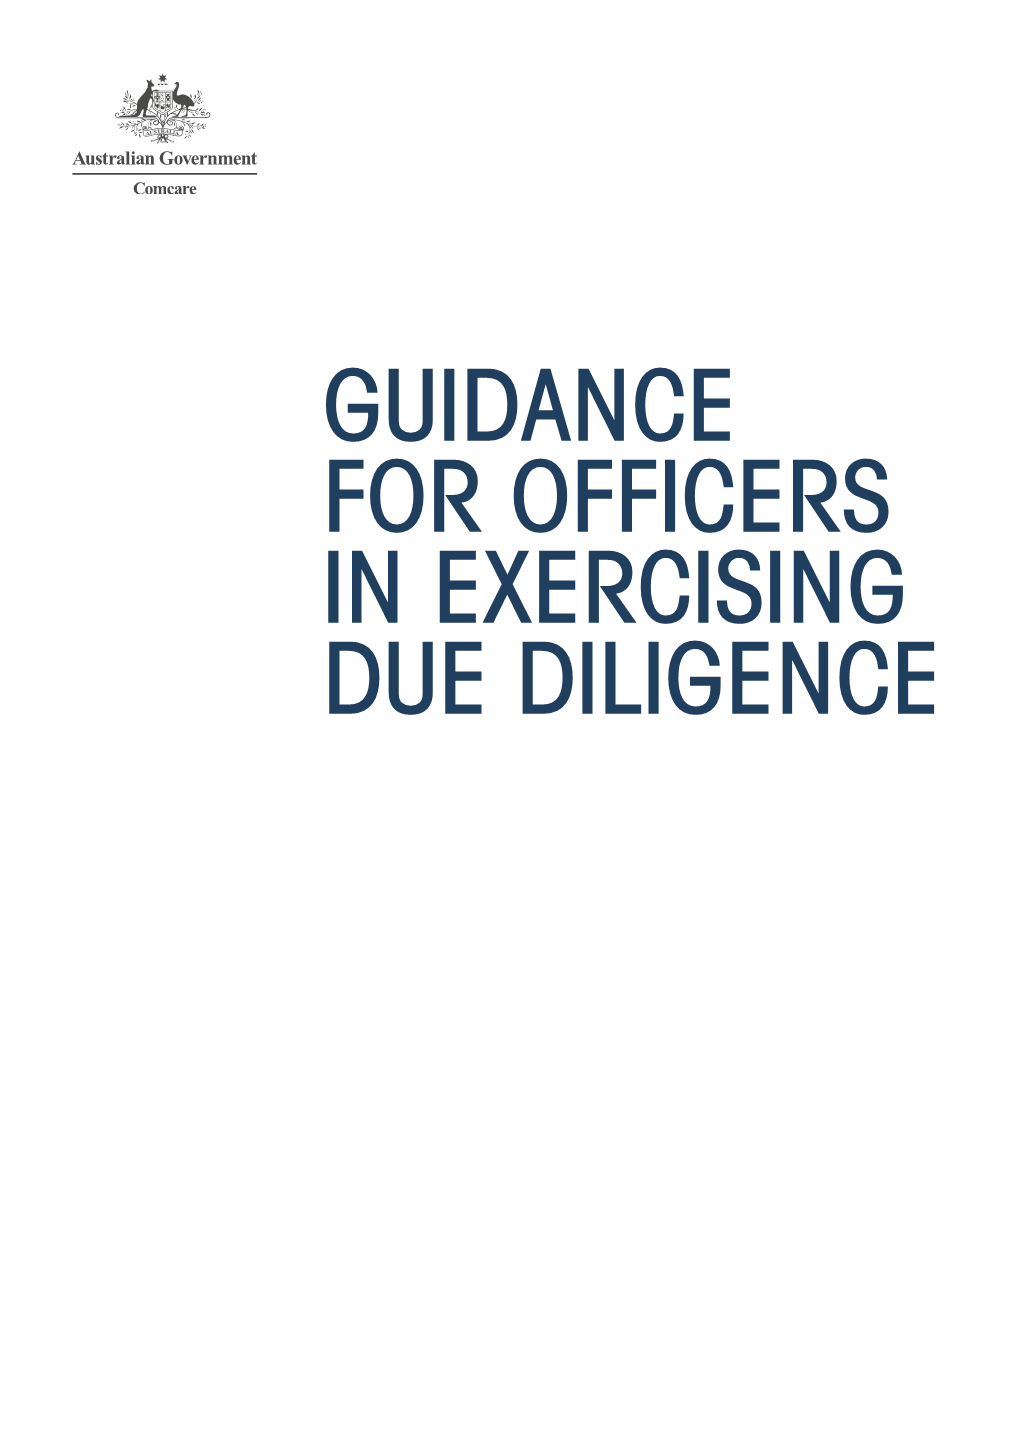 Exercising Due Diligence Guidance for Officers